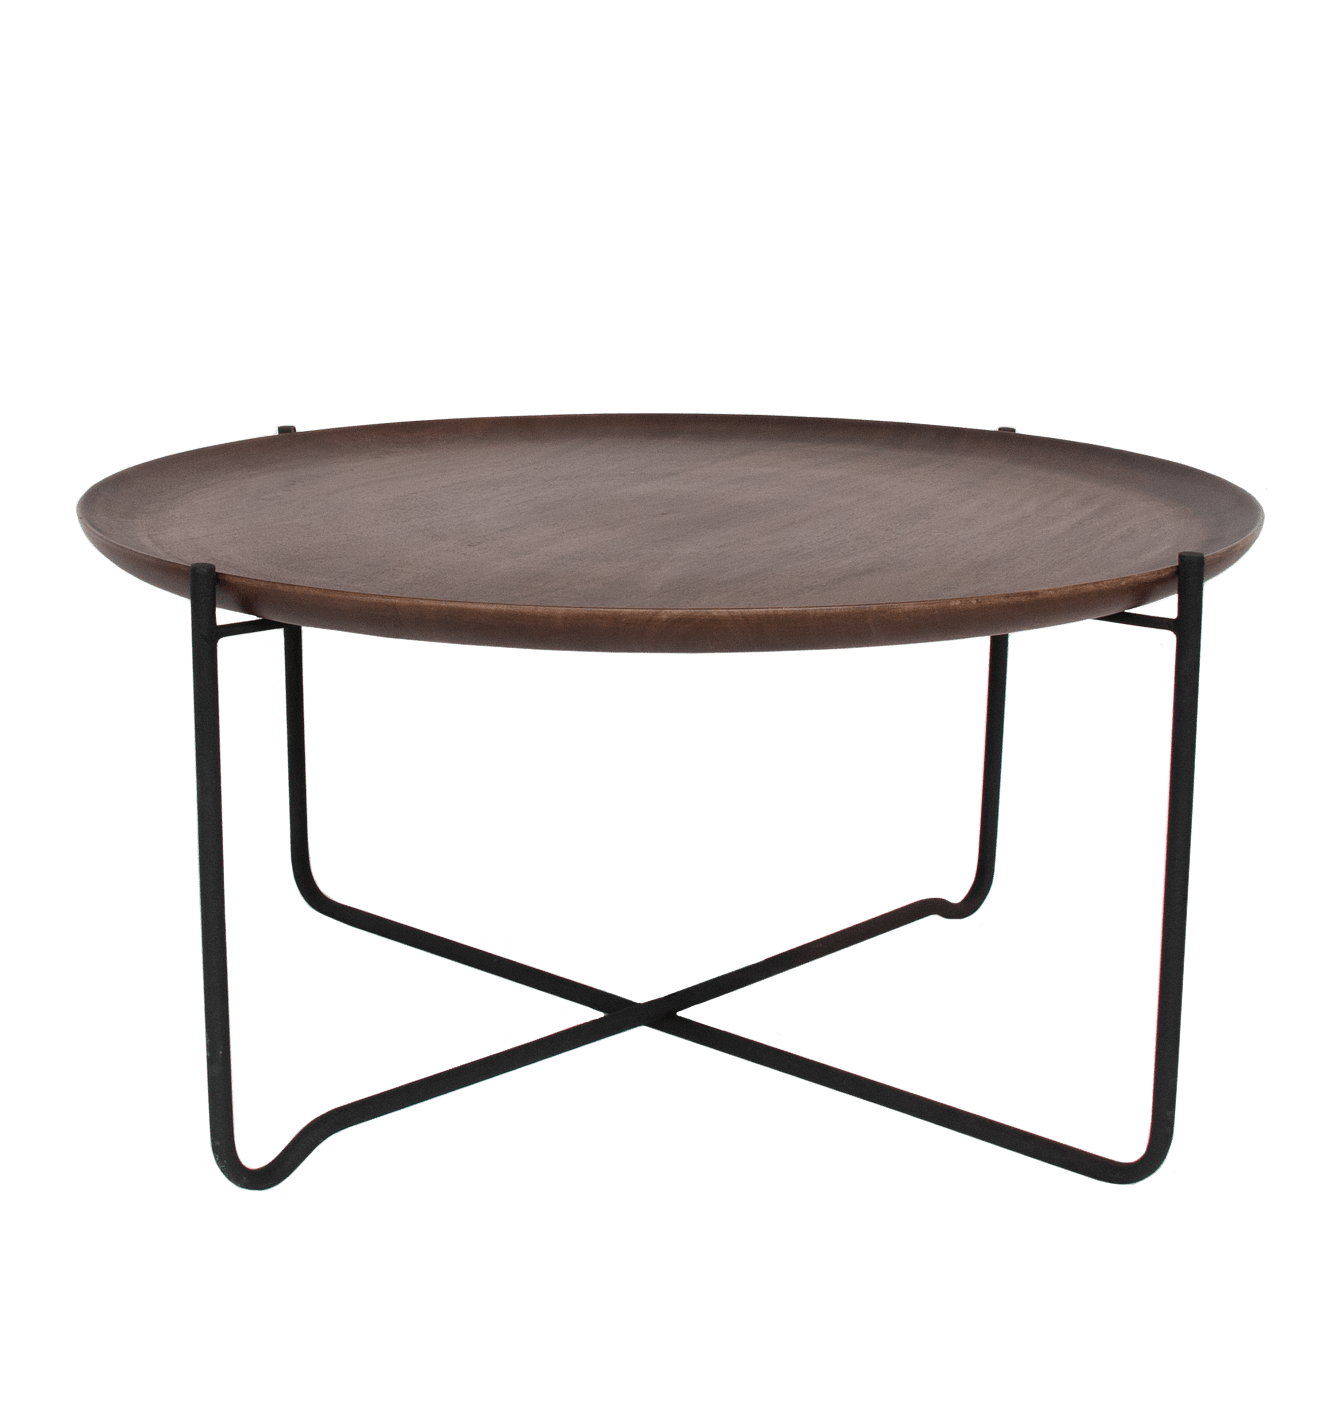 Urban Nature Culture Coffee table with serving tray Fez Brown / Mango / iron